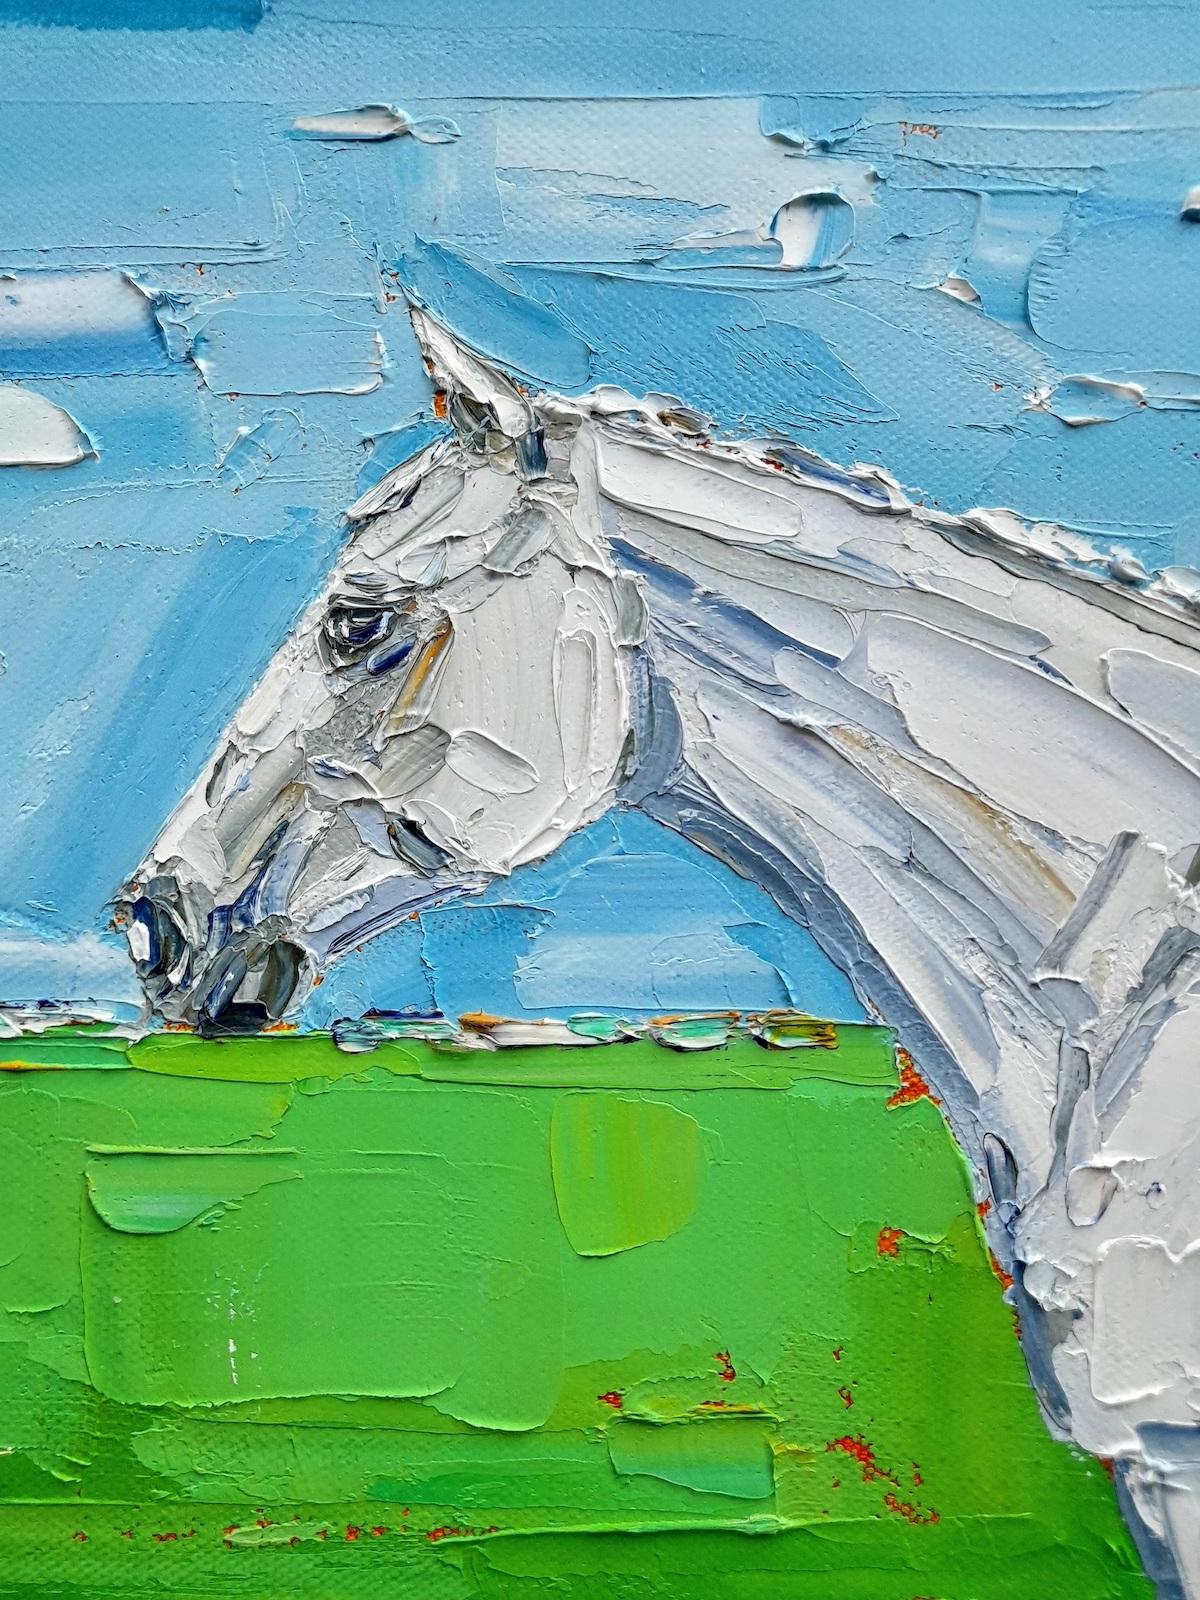 ‘Last Resort’ (White Horse) by Georgie Dowling [2021]
original and hand signed by the artist 
Oil paint on canvas
Image size: H:40 cm x W:40 cm
Complete Size of Unframed Work: H:40 cm x W:40 cm x D:2cm
Sold Unframed
Please note that insitu images